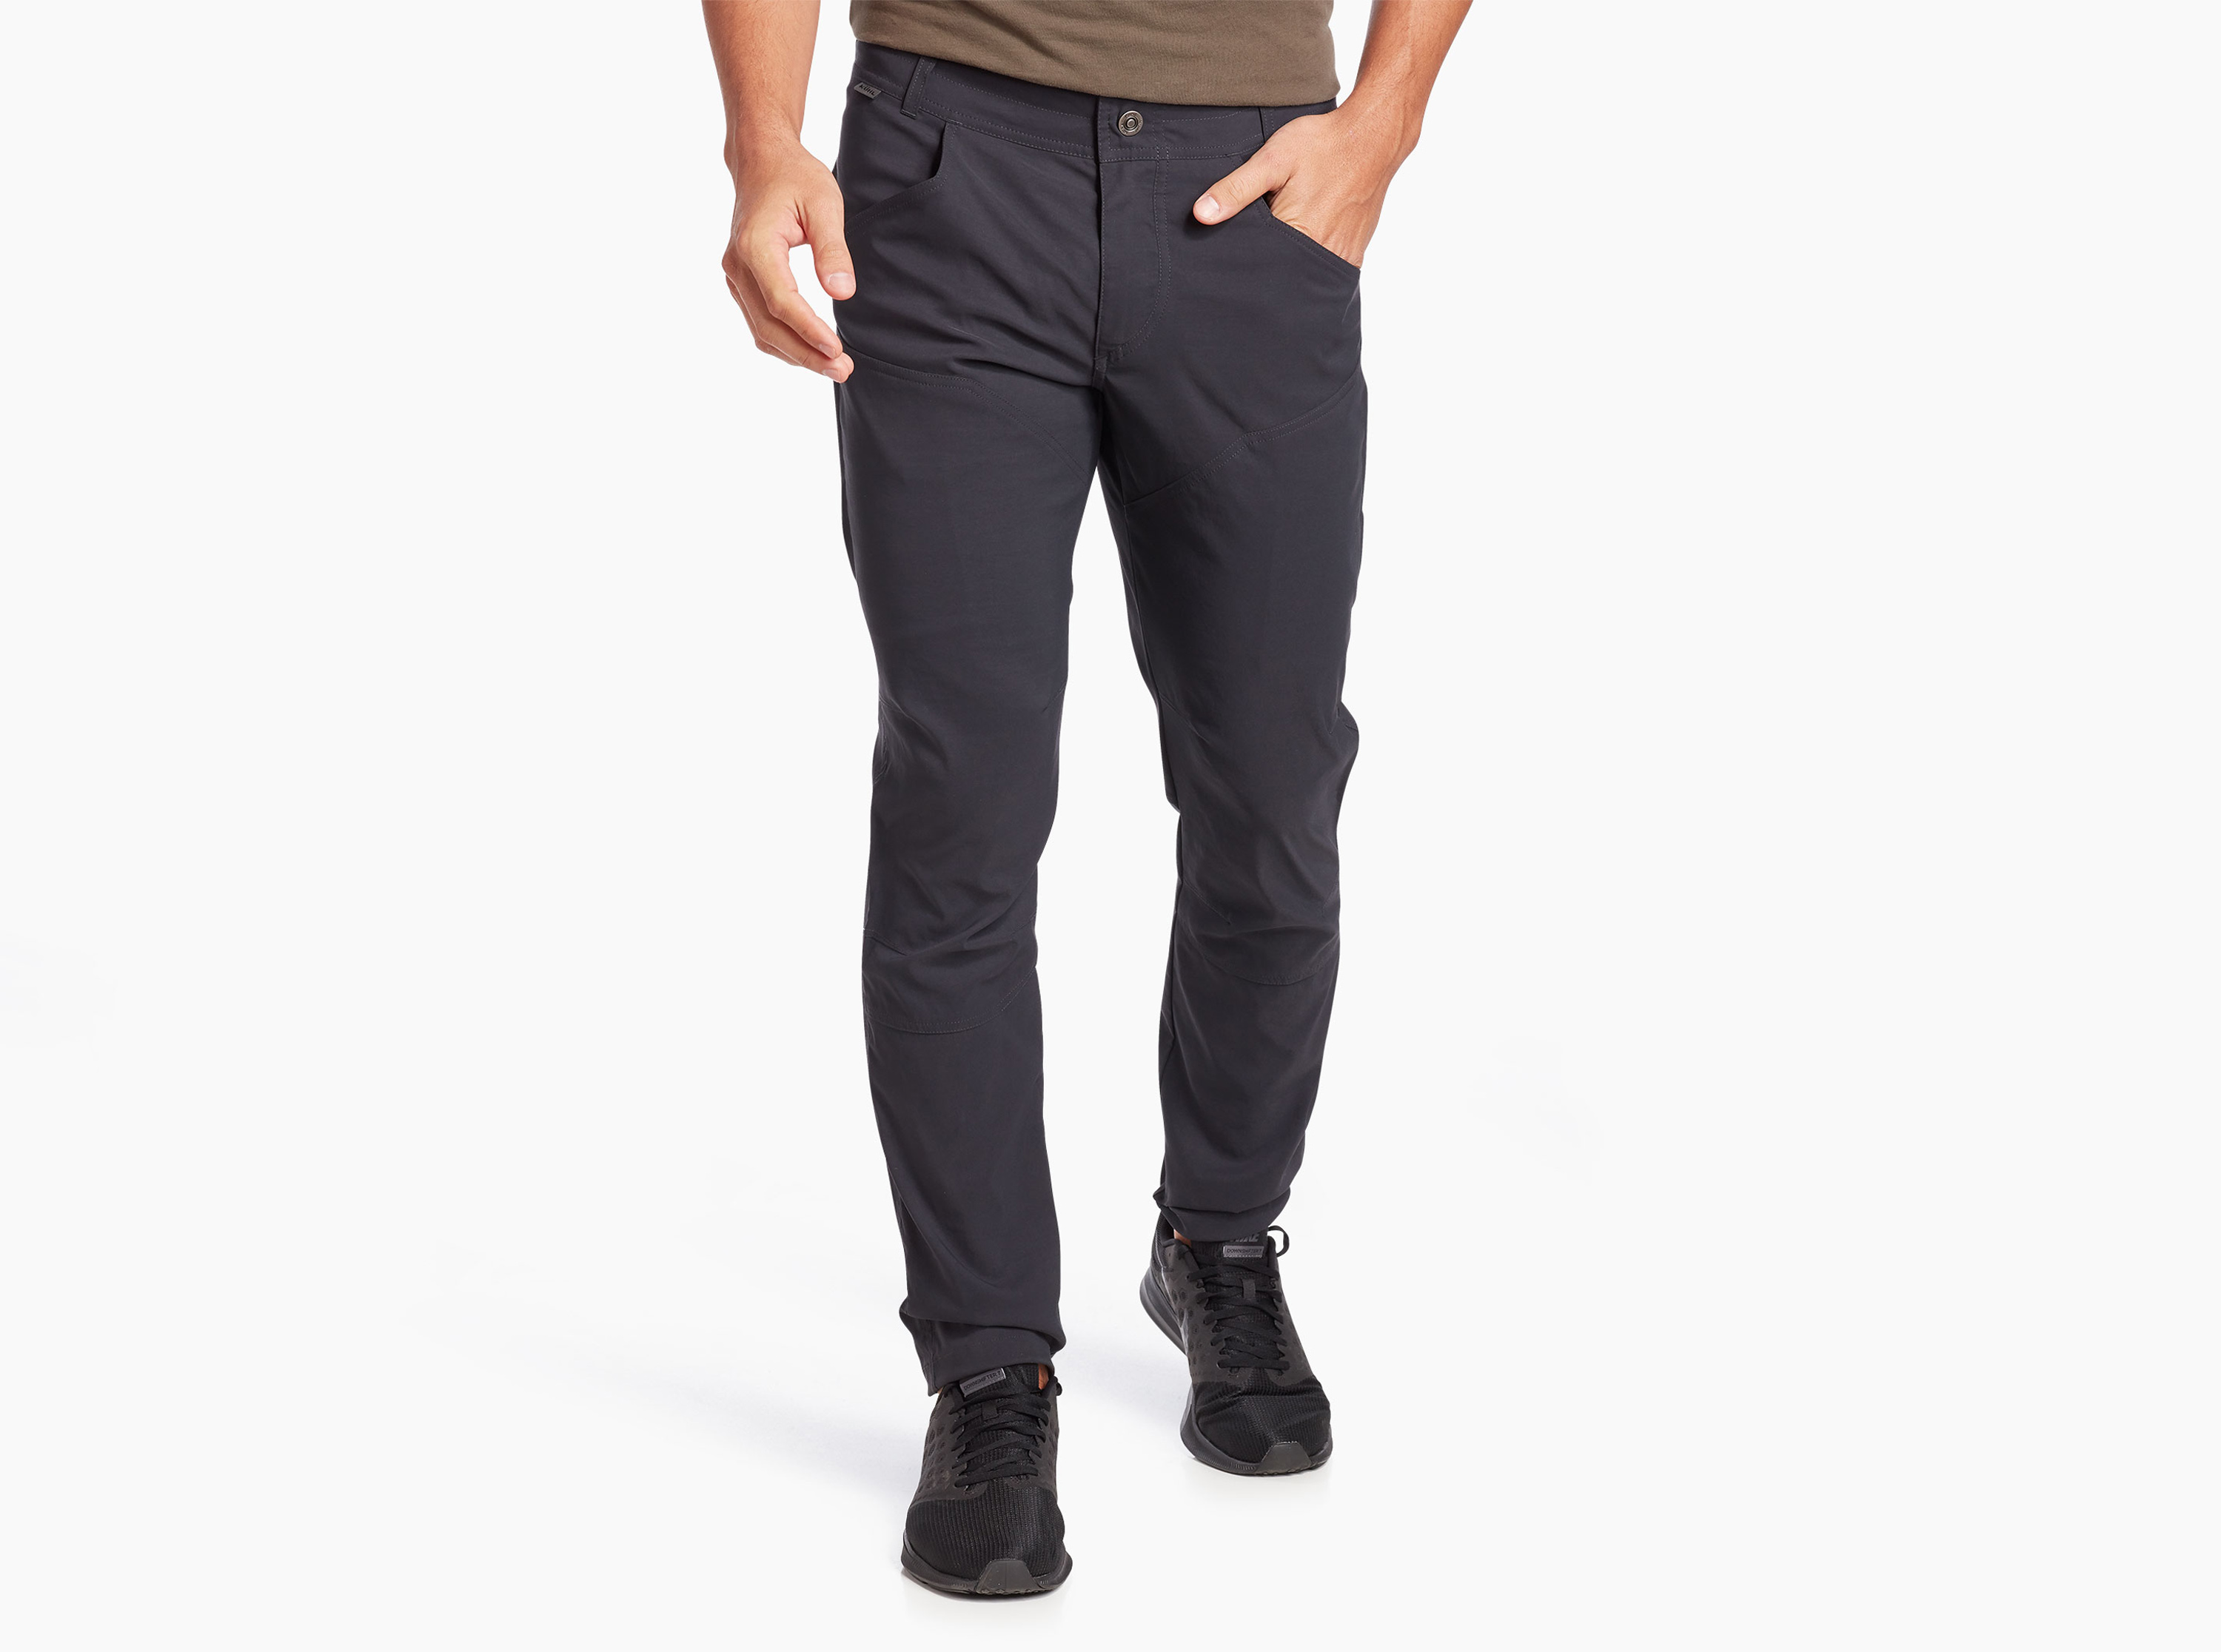 These Kuhl Hiking Pants Are on Sale at Backcountry